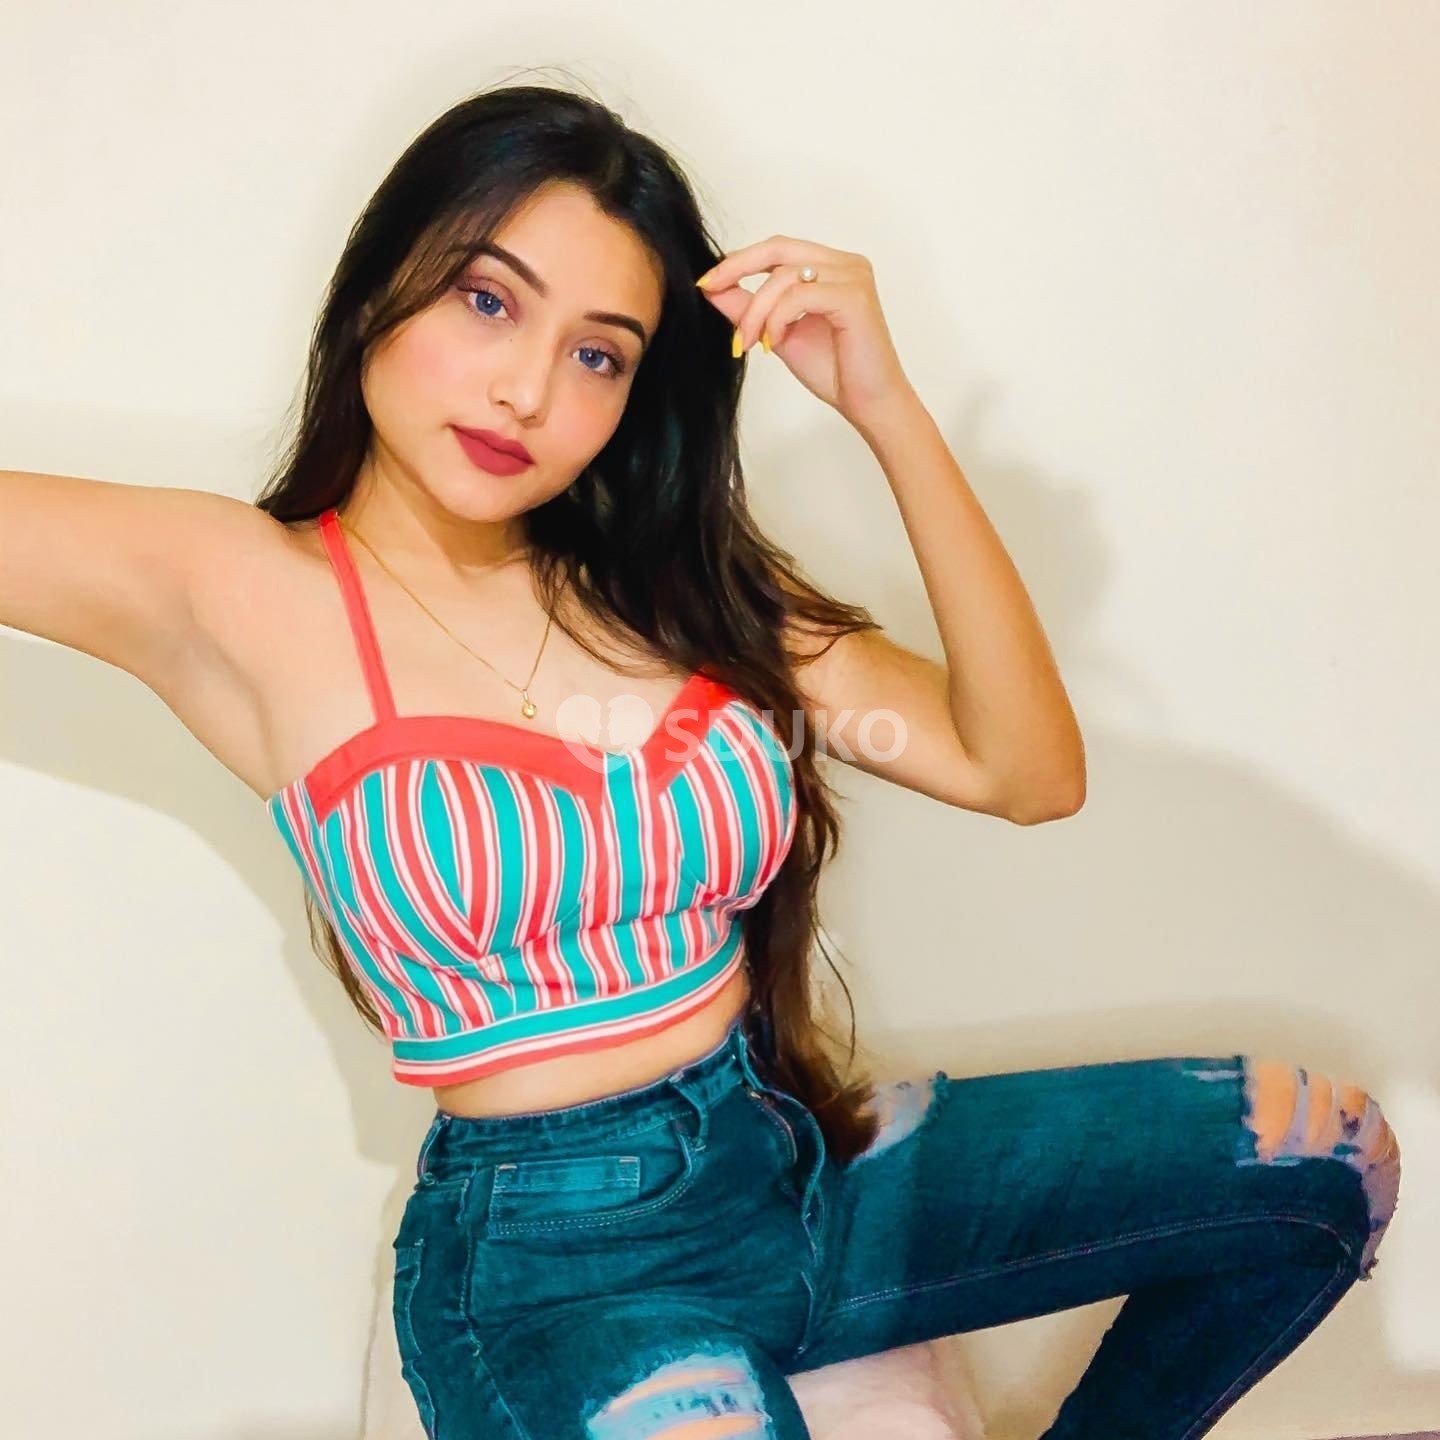 CUTTACK ♥️ MYSELF SWETA CALL GIRL & BODY-2-BODY MASSAGE SPA SERVICES OUTCALL OUTCALL INCALL 24 HOURS...